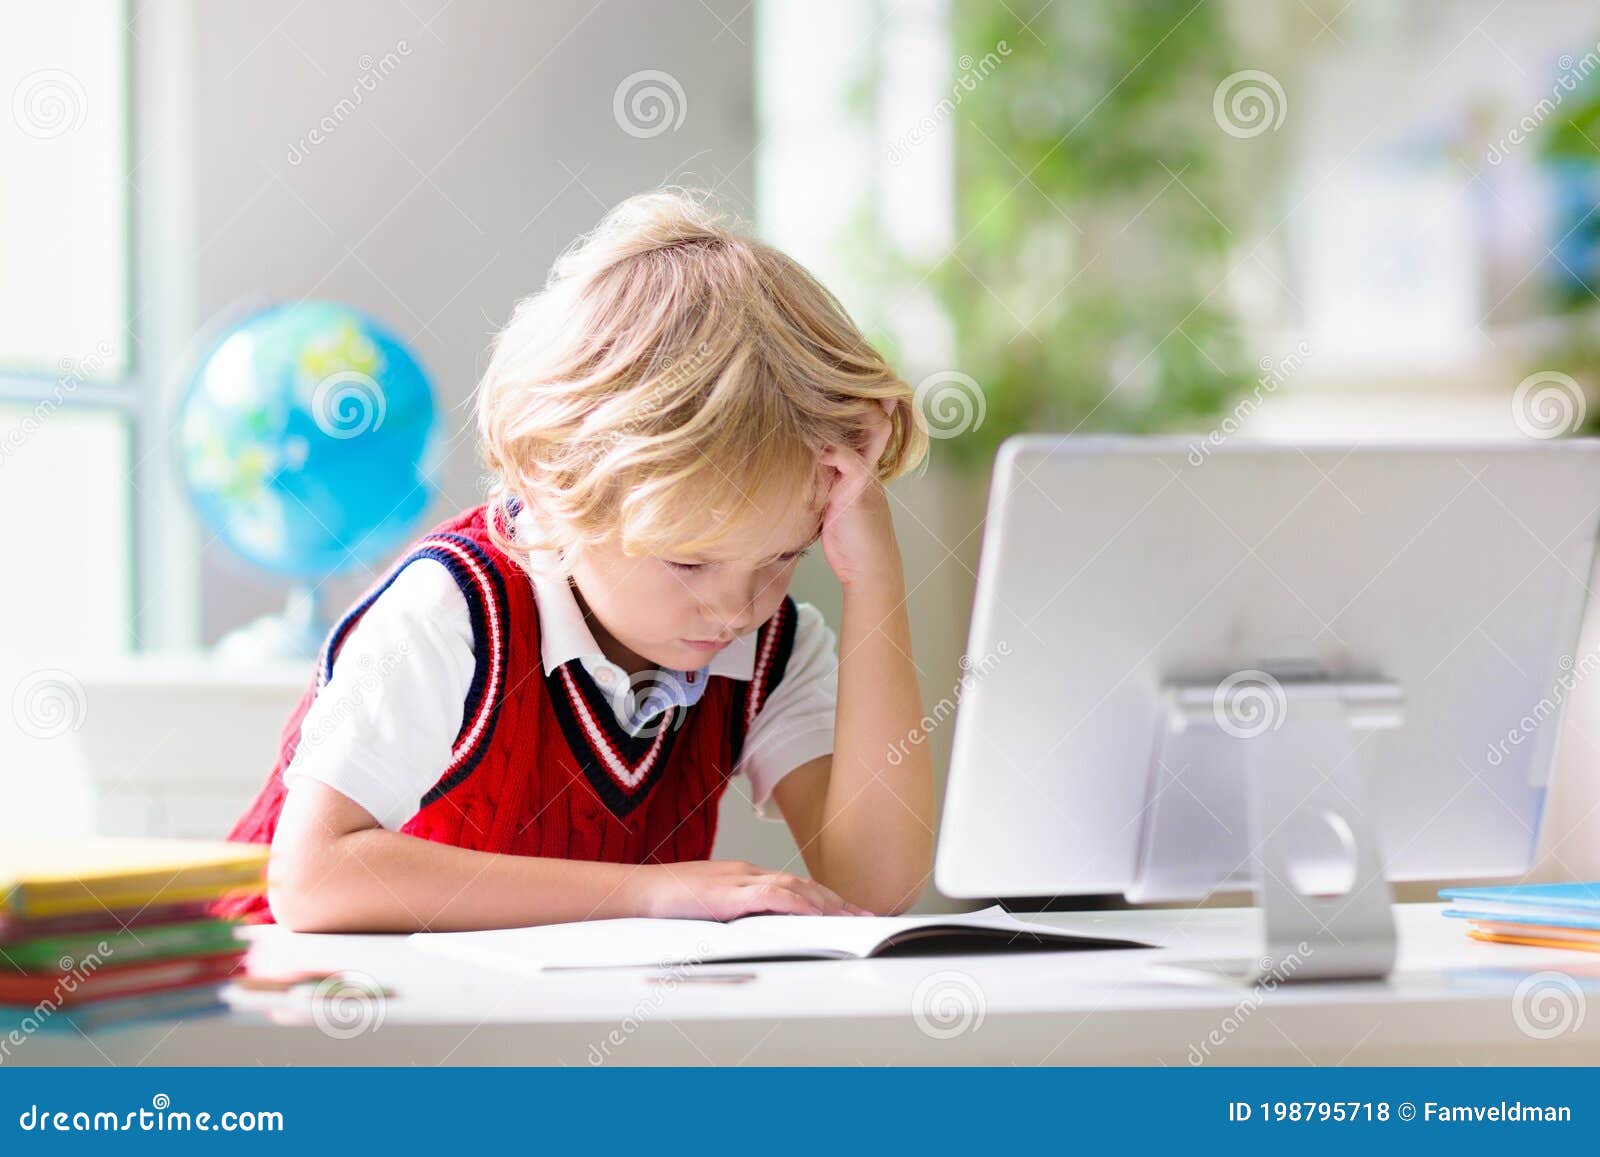 Online Remote Learning. School Kids with Computer Stock Photo - Image of  chat, communication: 198795718